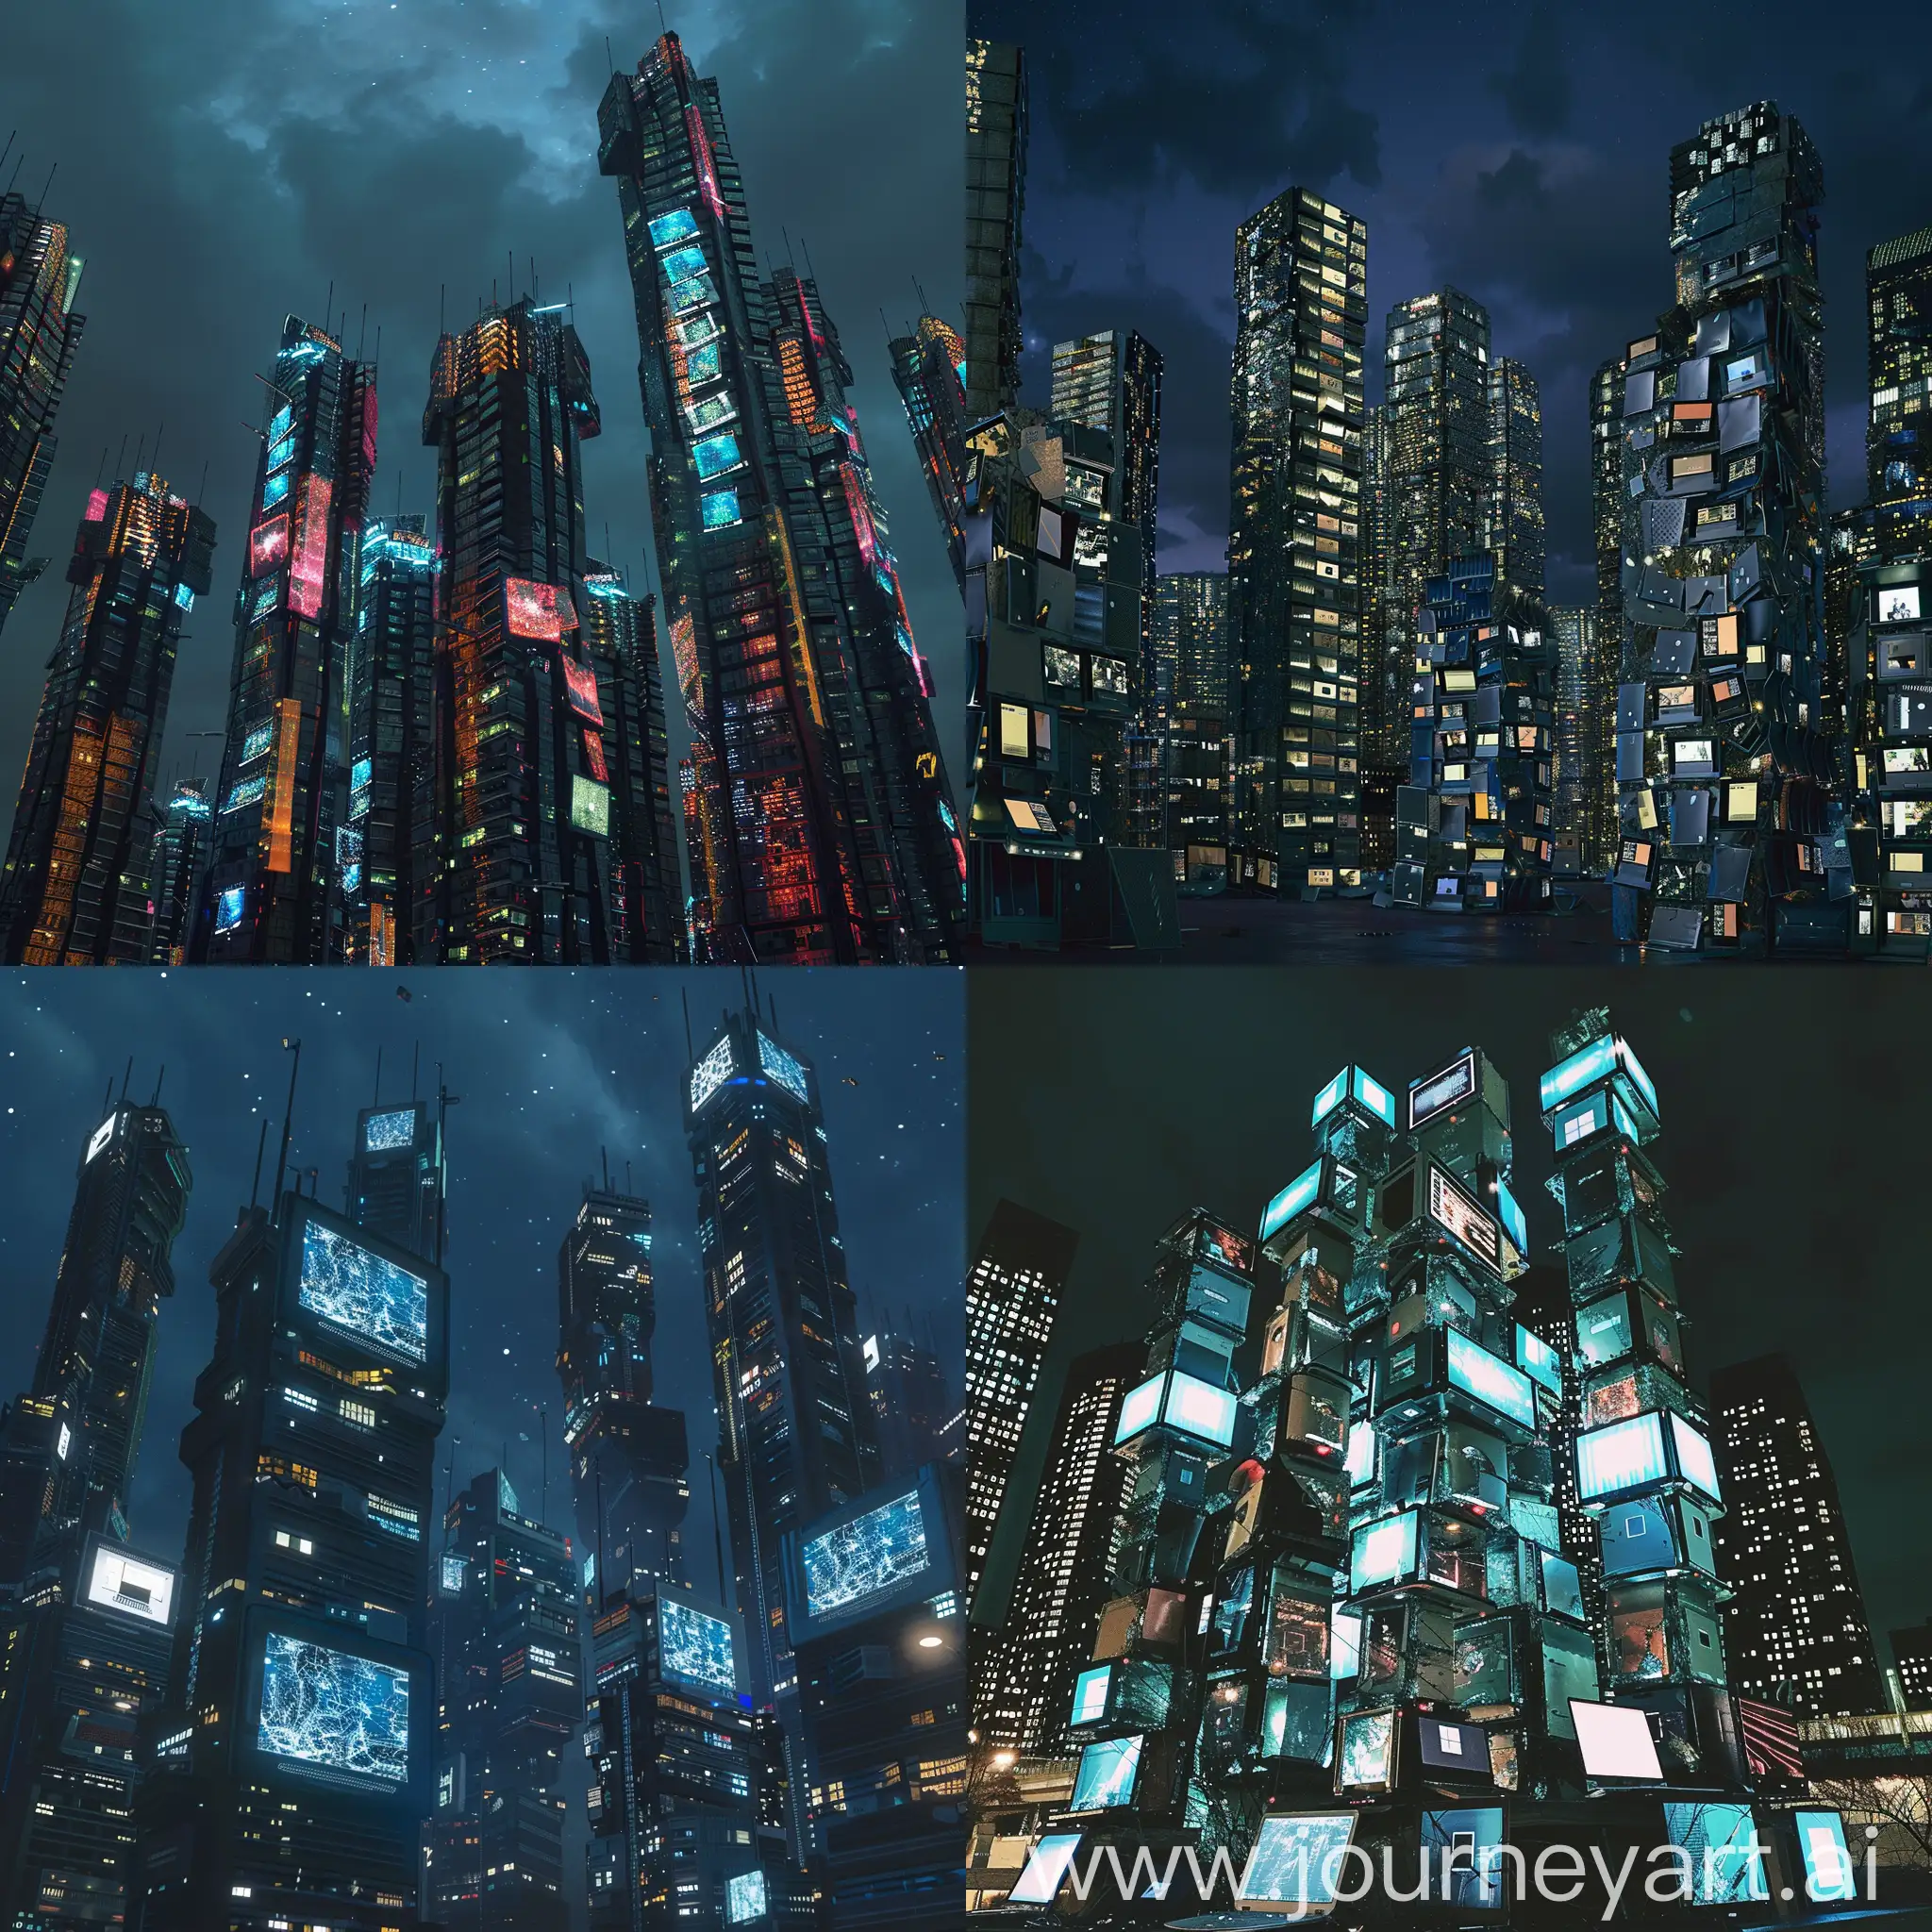 Futuristic-Urban-Landscape-Glowing-Skyscrapers-Crafted-from-Recycled-Laptops